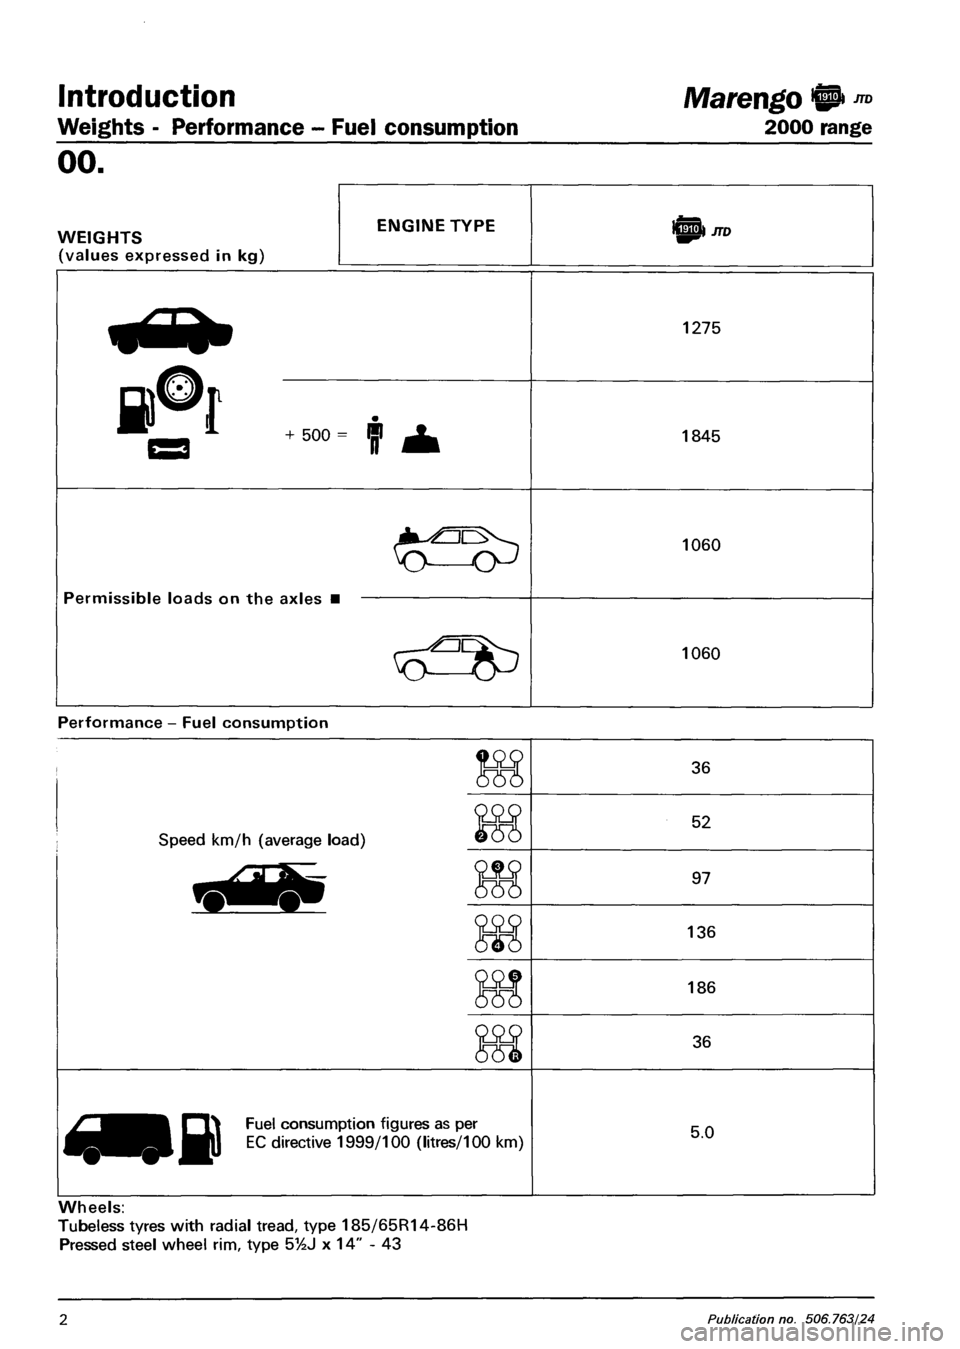 FIAT MAREA 2000 1.G Repair Manual Introduction 
Weights - Performance - Fuel consumption 
Marengo ® ™ 
2000 range 
oo. 
WEIGHTS 
(values expressed in kg) 
ENGINE TYPE IE®! JTD 
1275 
1845 
Permissible loads on the axles • 
1060 